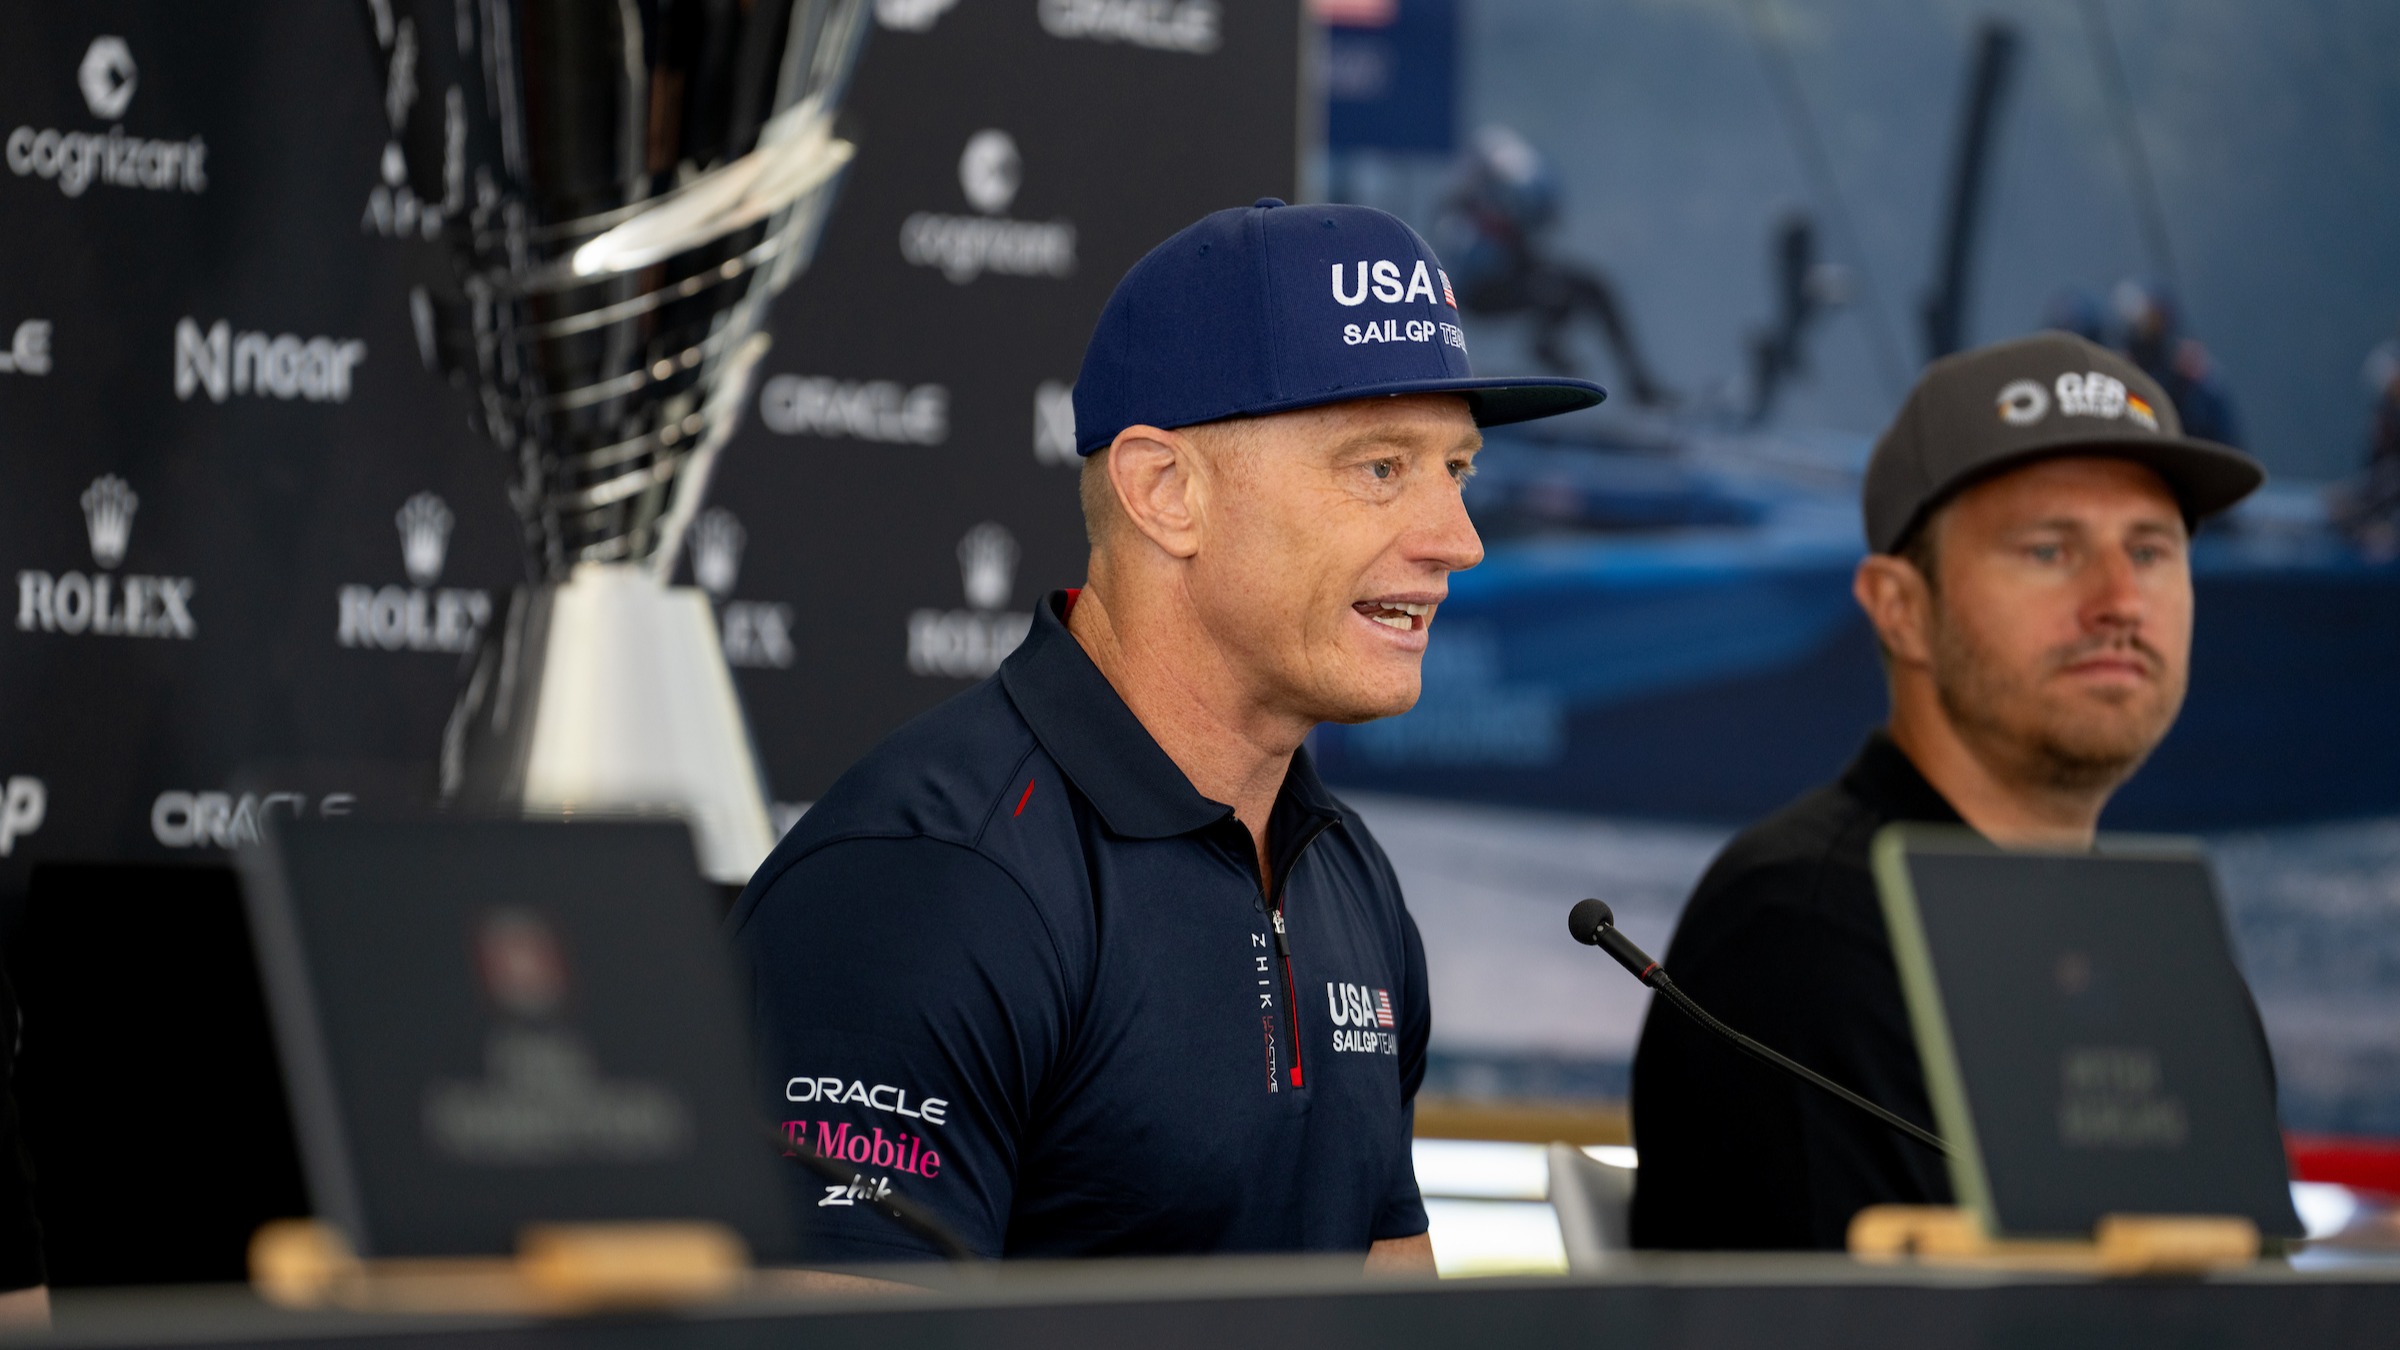 Season 4 // Los Angeles Sail Grand Prix // Spithill with Erik Heil at the press conference 